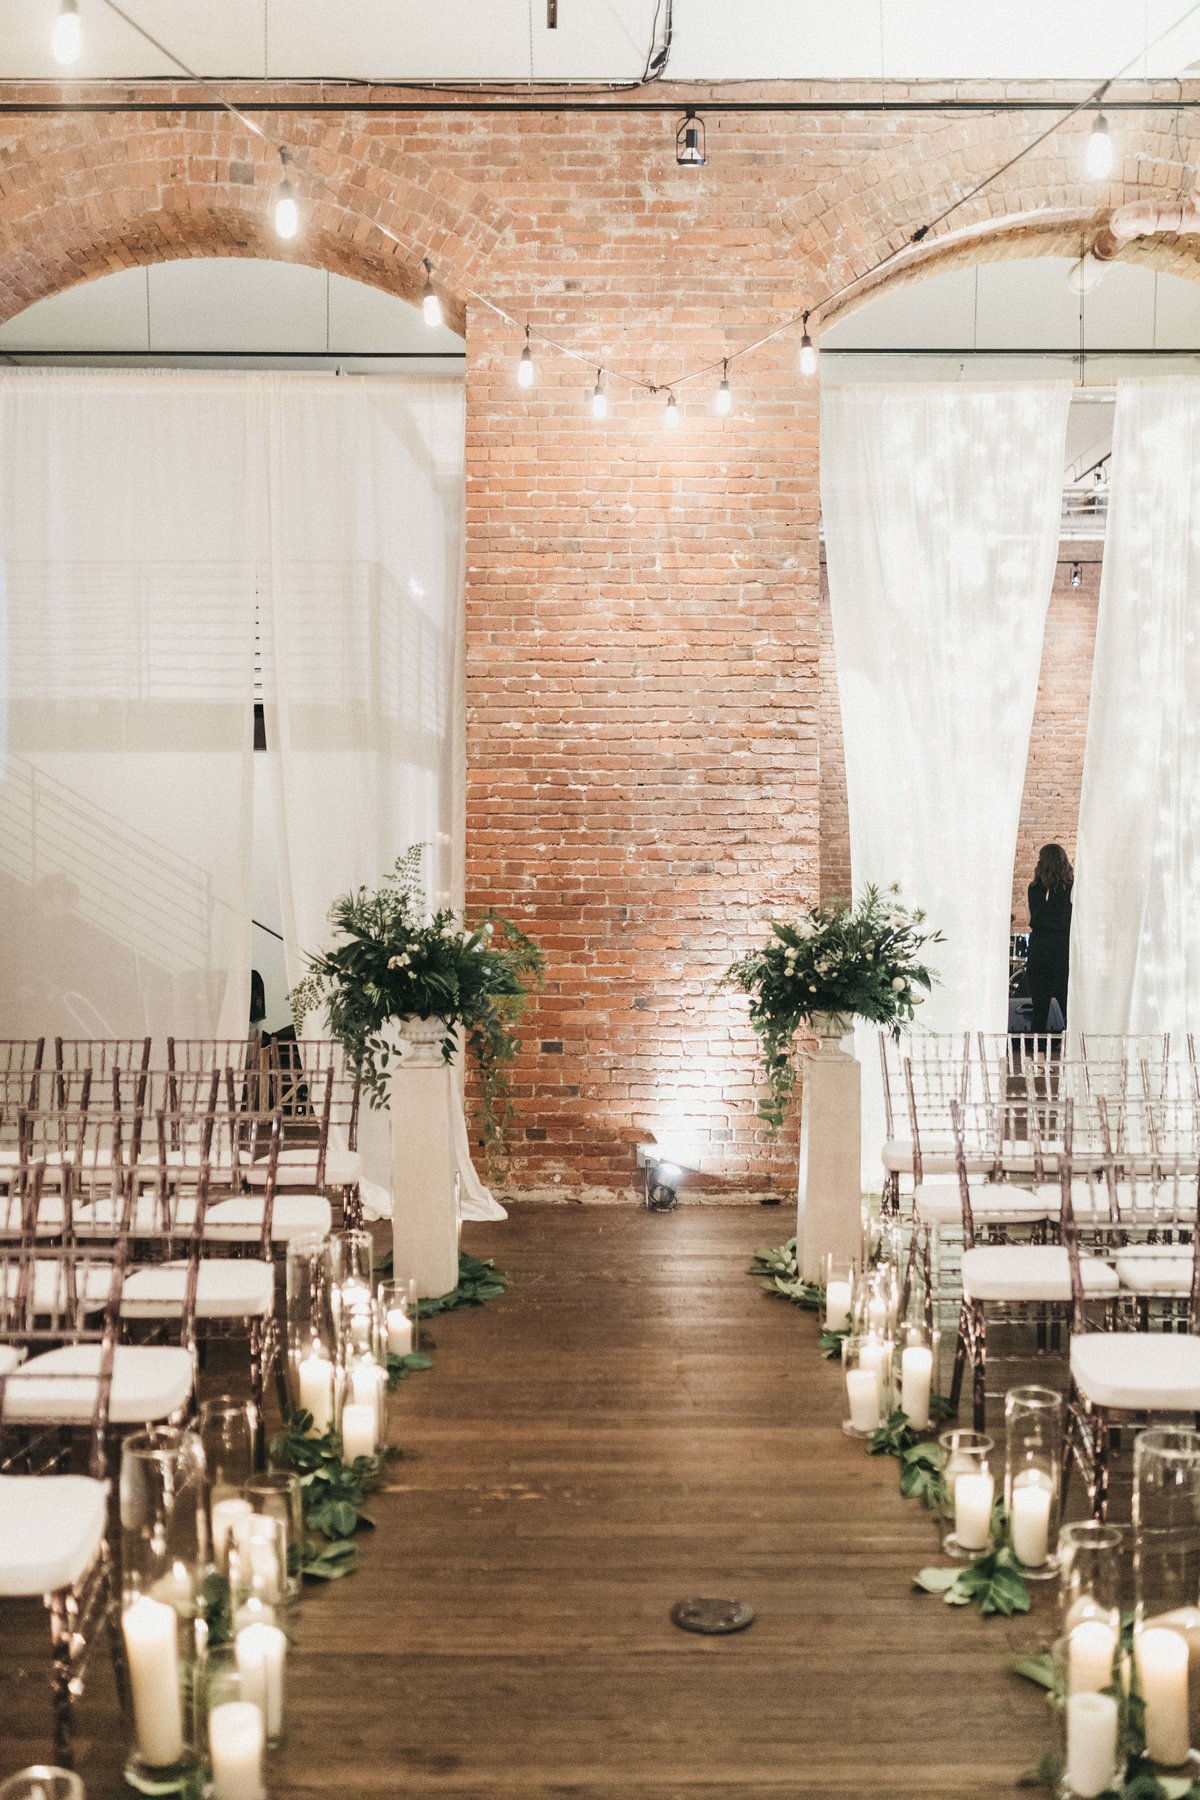 wedding aisle with lots of hurricane candles, lined with greenery, and tall greenery arrangements at aisle entrance